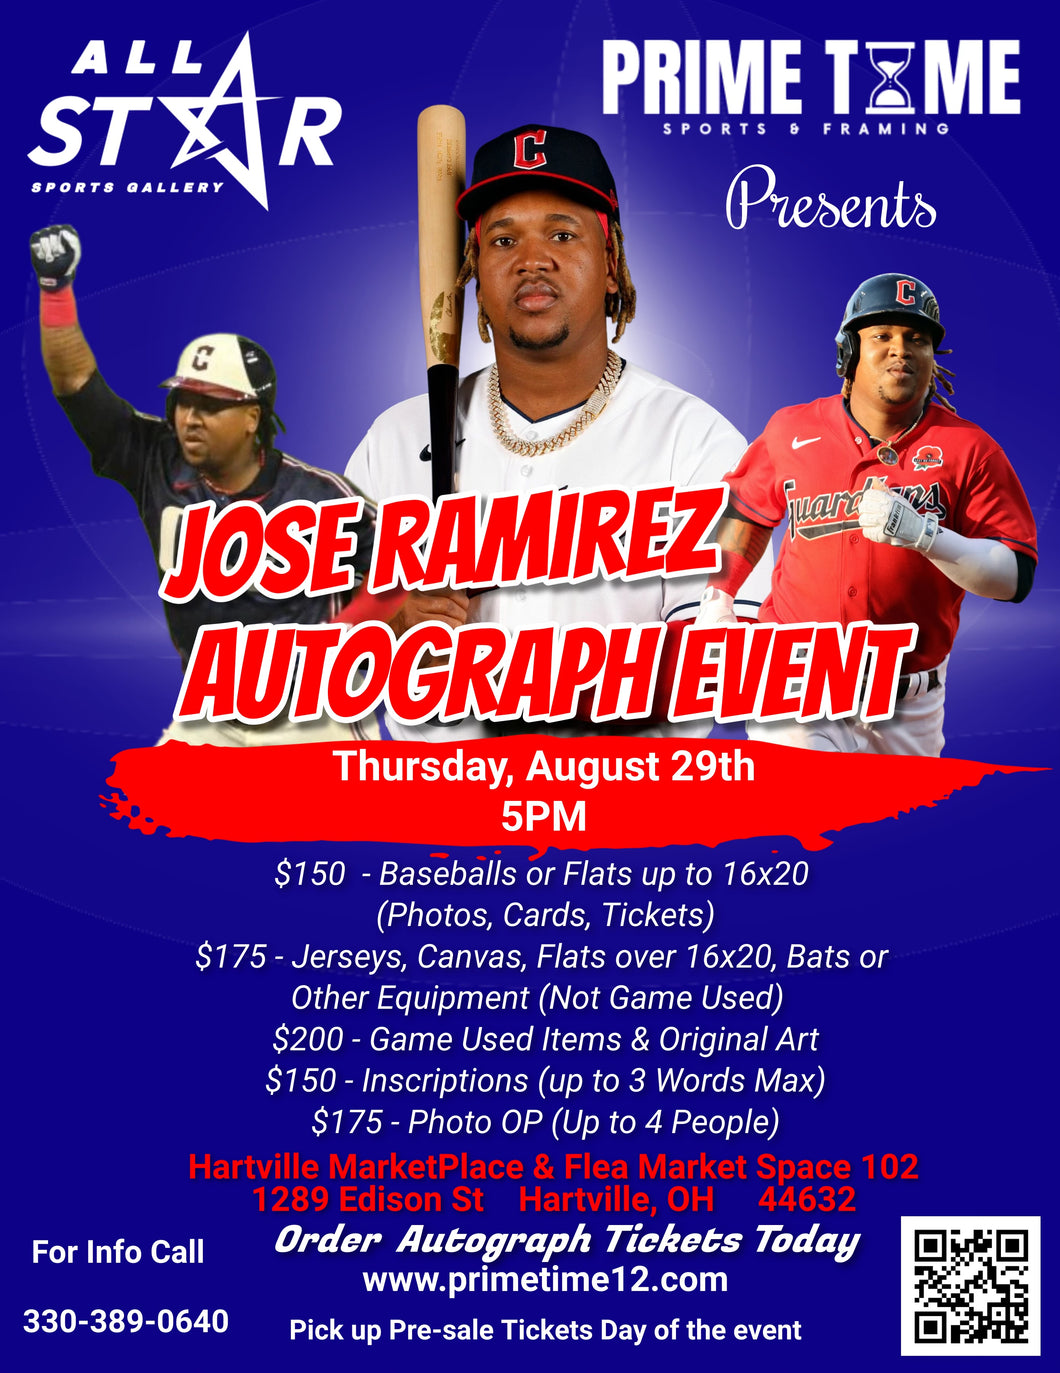 Jose Ramirez Pre-Sale ticket for autograph signing on any 1 Game Used Item or Original Artwork